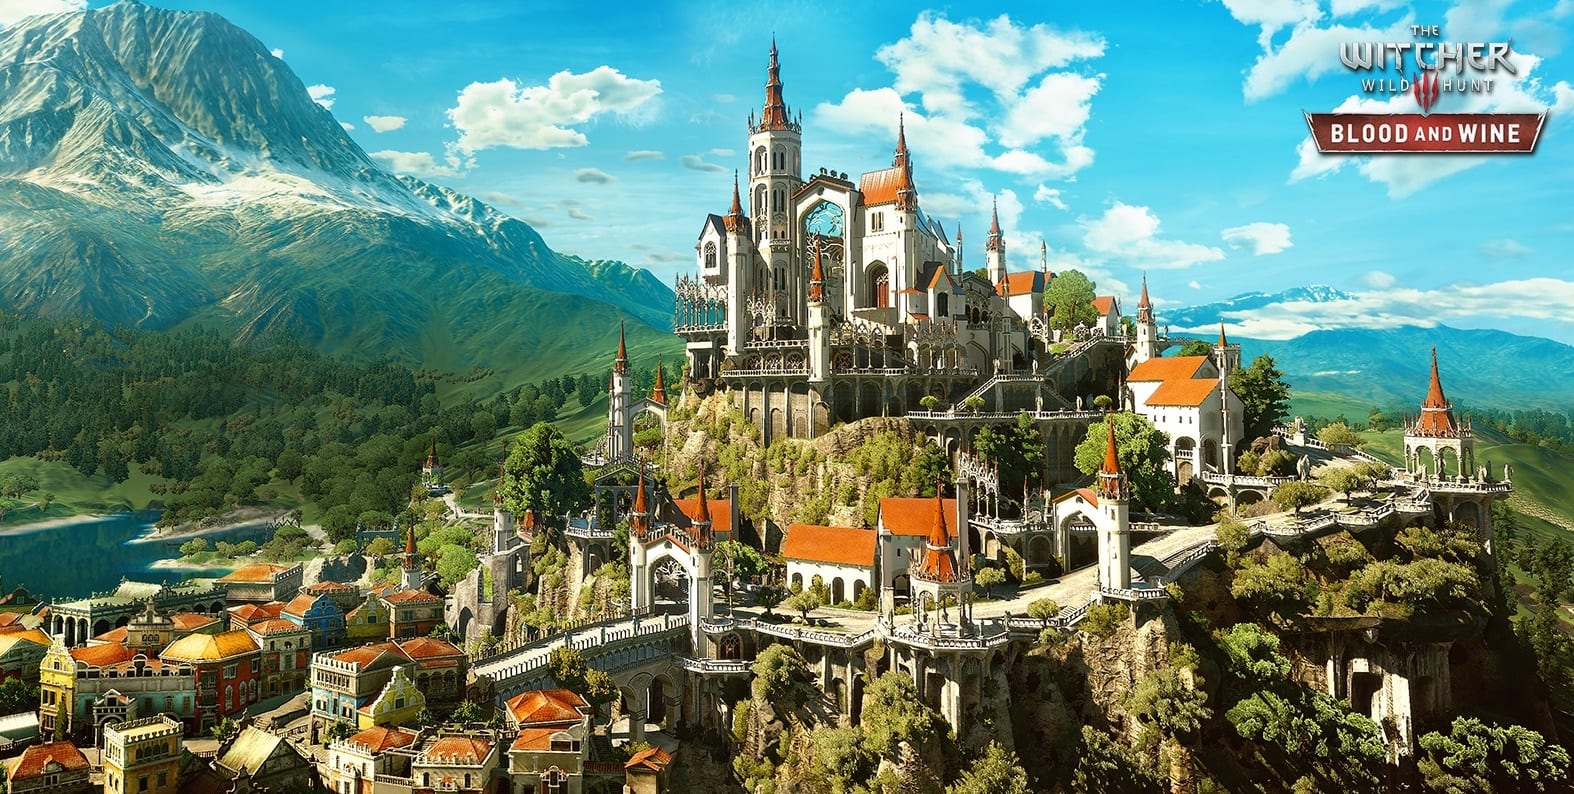 Review: The Witcher 3: Blood and Wine Expansion (PS4)